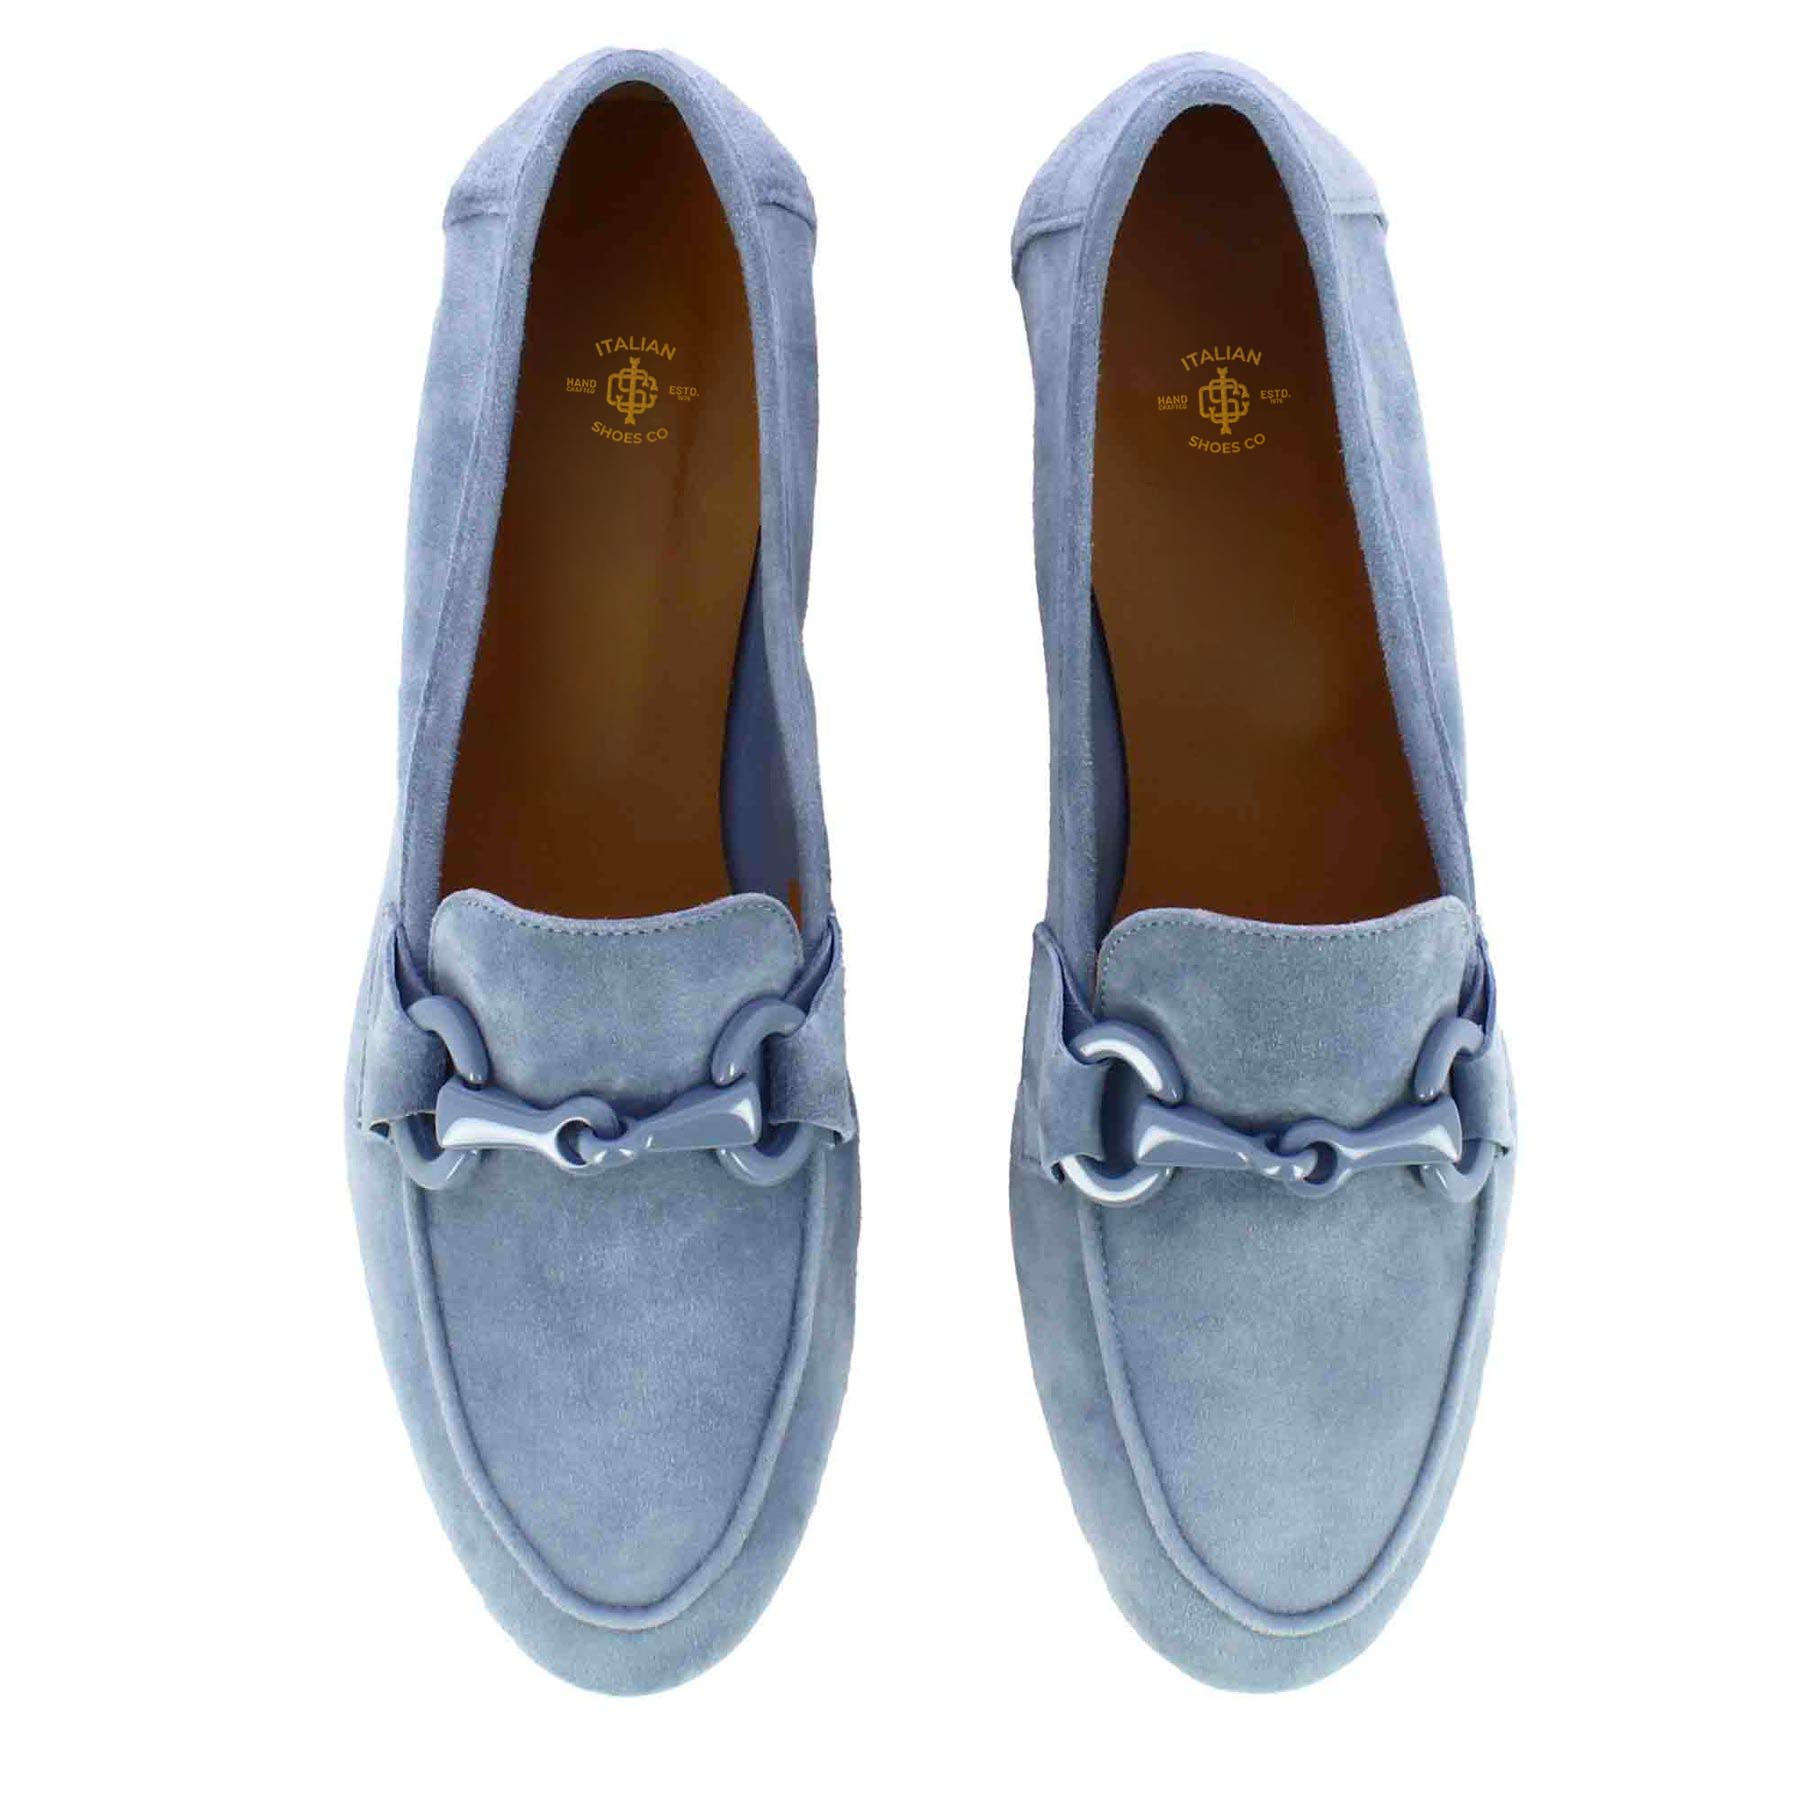 Women's Suede Moccasin With Turquoise Horsebit